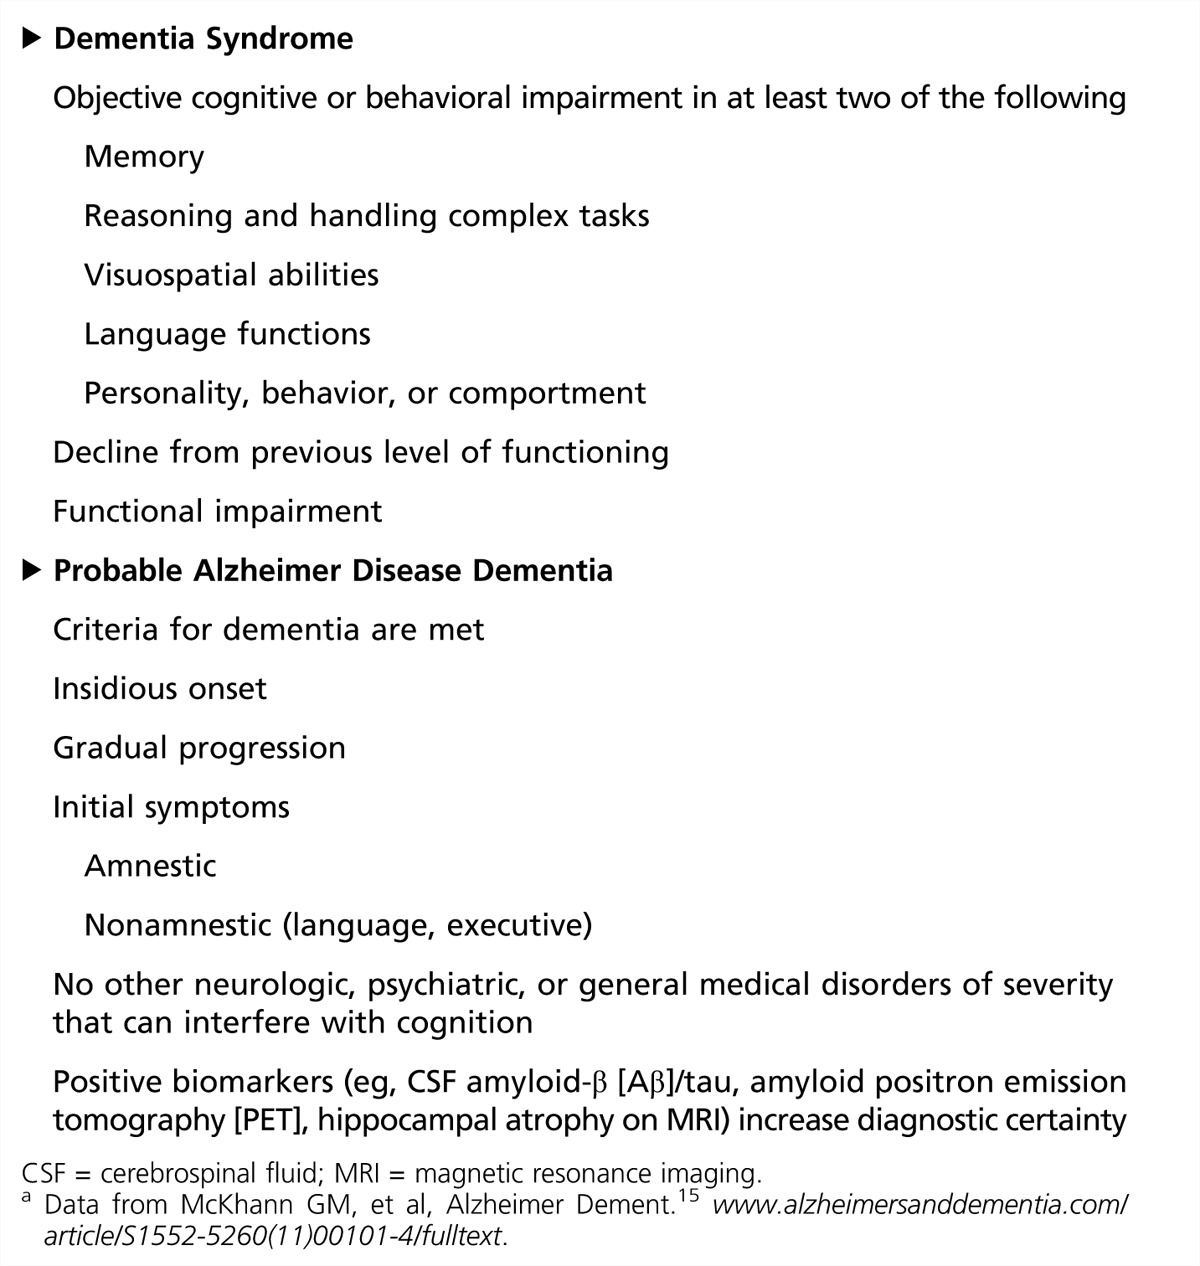 Summary of Diagnostic Criteria for Dementia Syndrome and Probable Alzheimer Disease from the National Institute on Aging and the Alzheimer’s Association